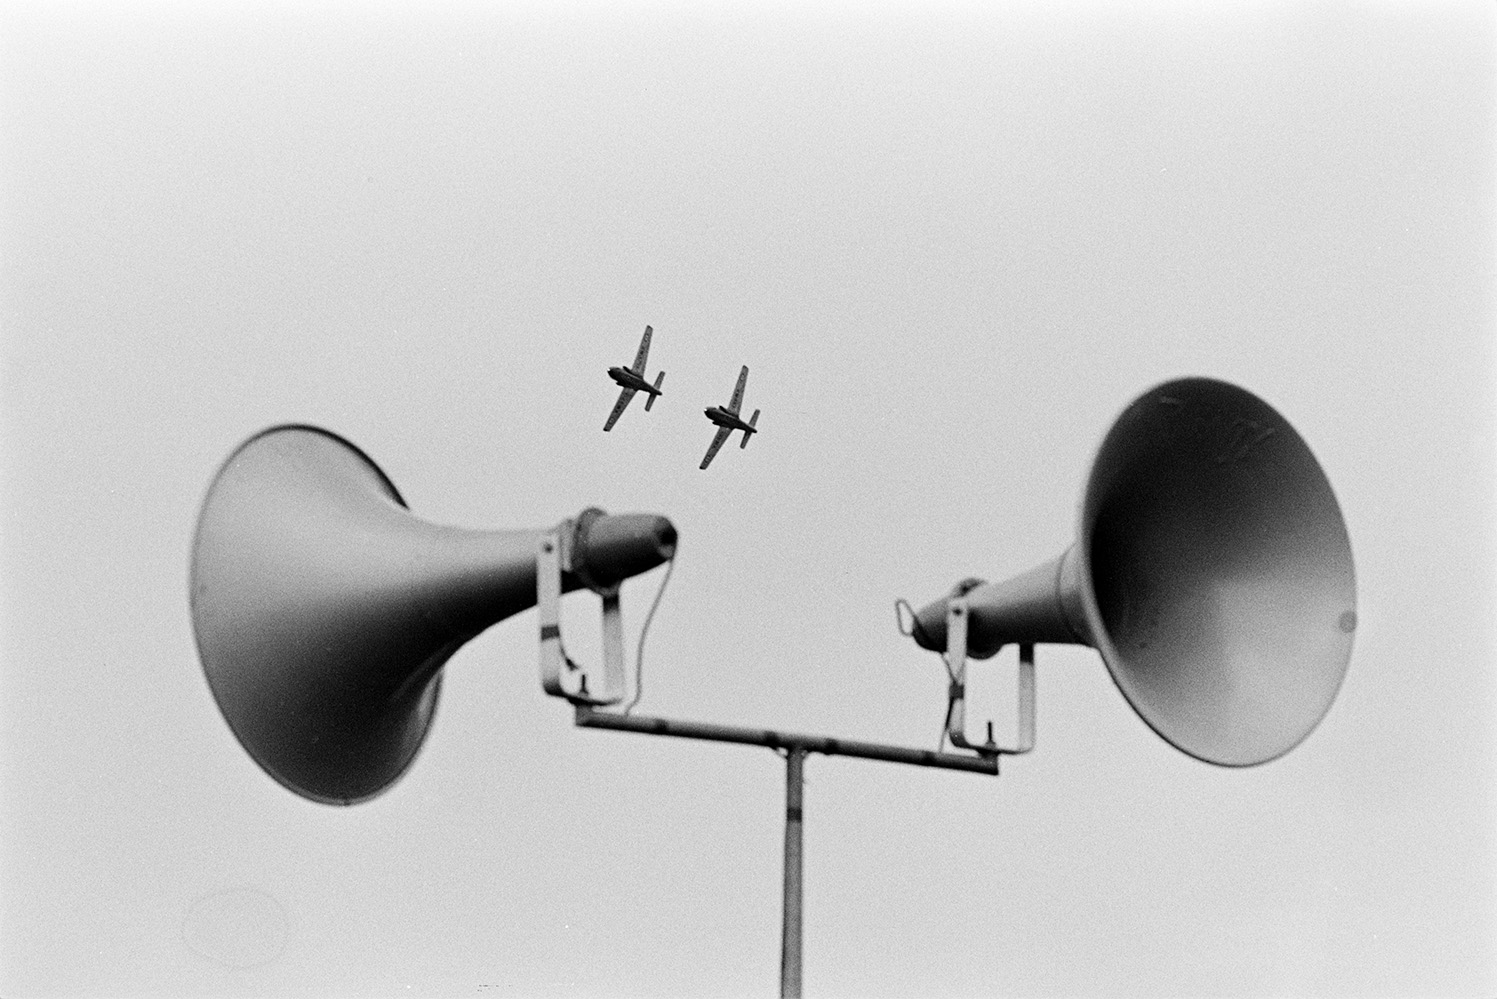 Loud speakers at Chivenor Air Show at the Royal Marine Base in Braunton. Two aeroplanes can be seen giving a display in the background.